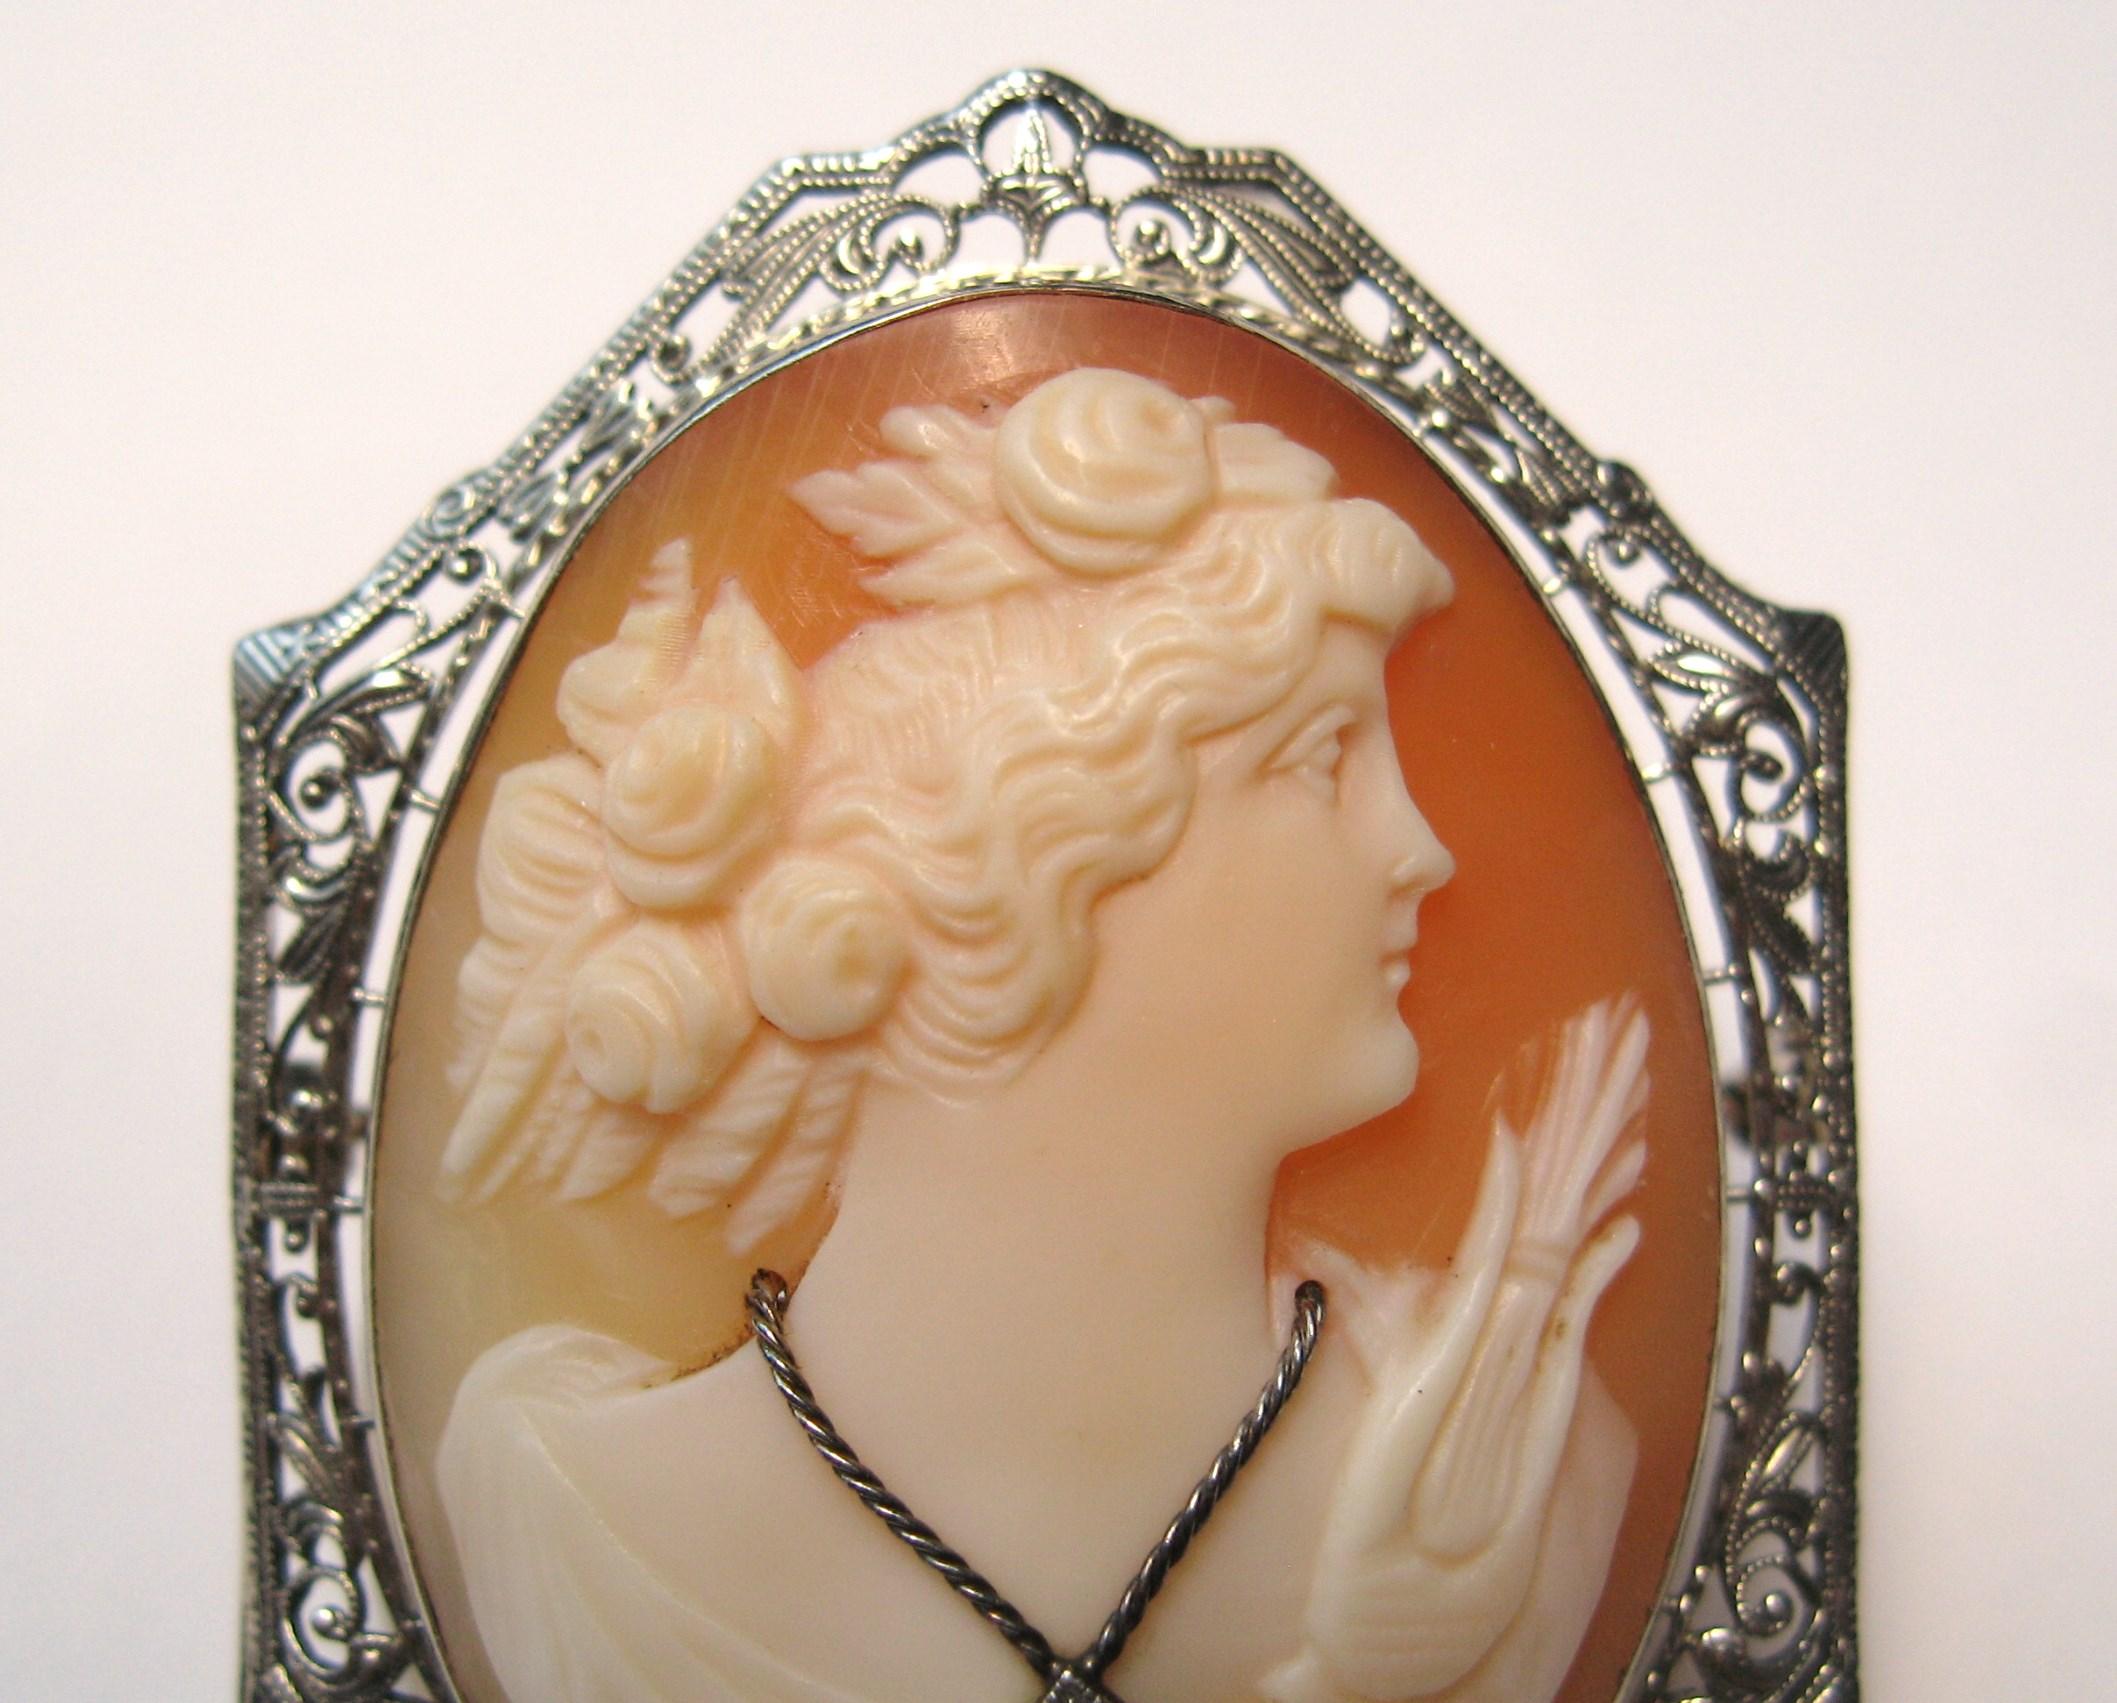 Lovely 14k White Gold Carved Cameo Brooch Depicting a lovely lady with a wonderful diamond necklace. It measures 1.82 in.  top to bottom x 1.34 in. wide. Pin back works great. What a wonderful addition to your jewelry collection. Please check our